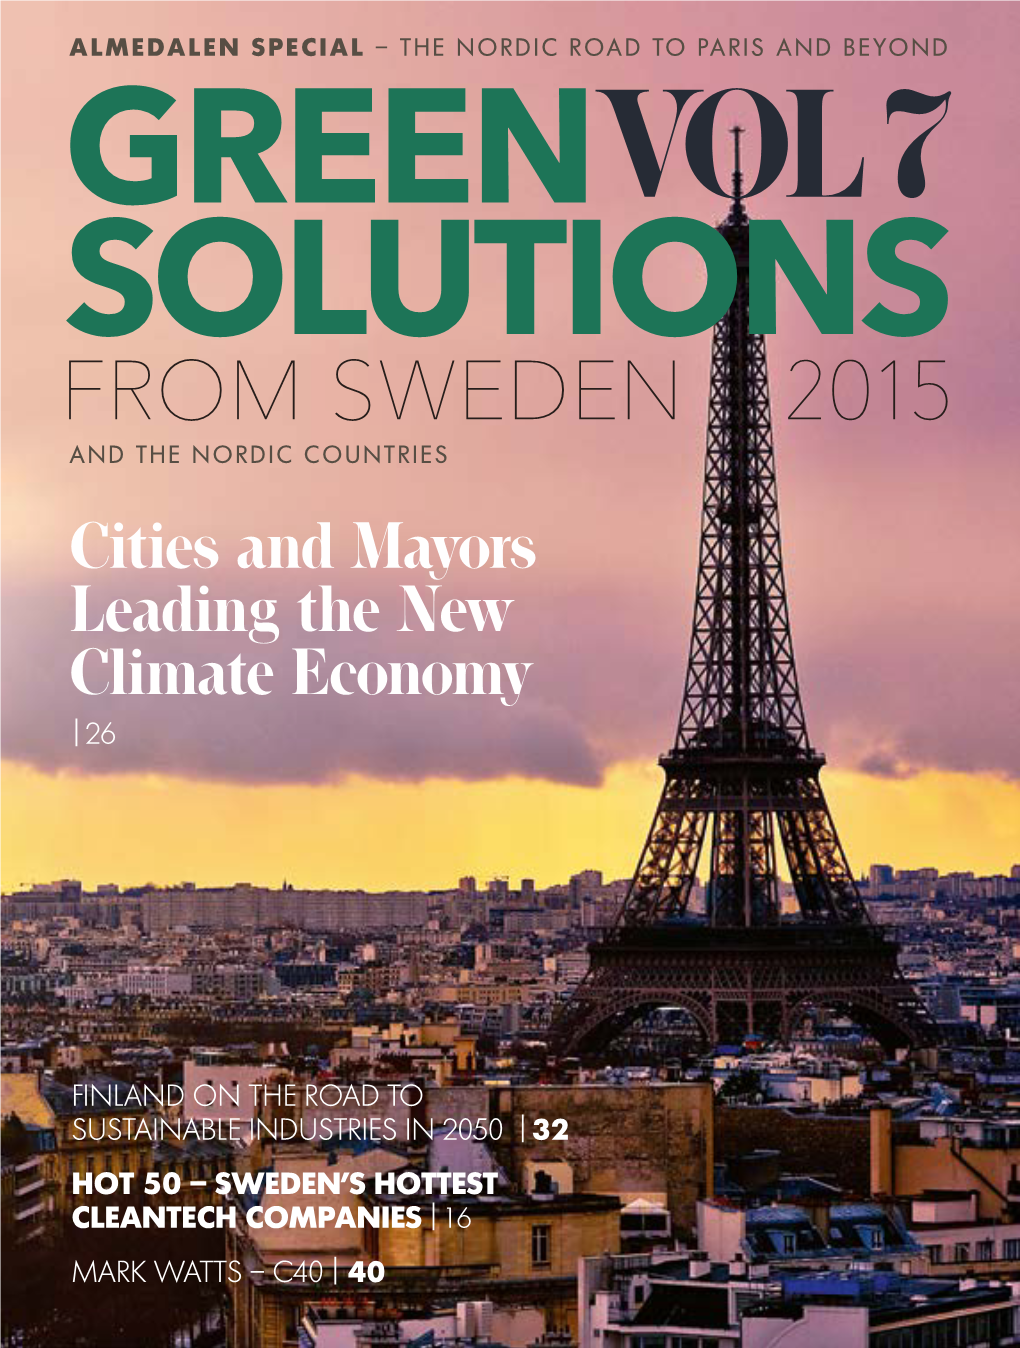 FROM SWEDEN 2015 and the NORDIC COUNTRIES Cities and Mayors Leading the New Climate Economy | 26